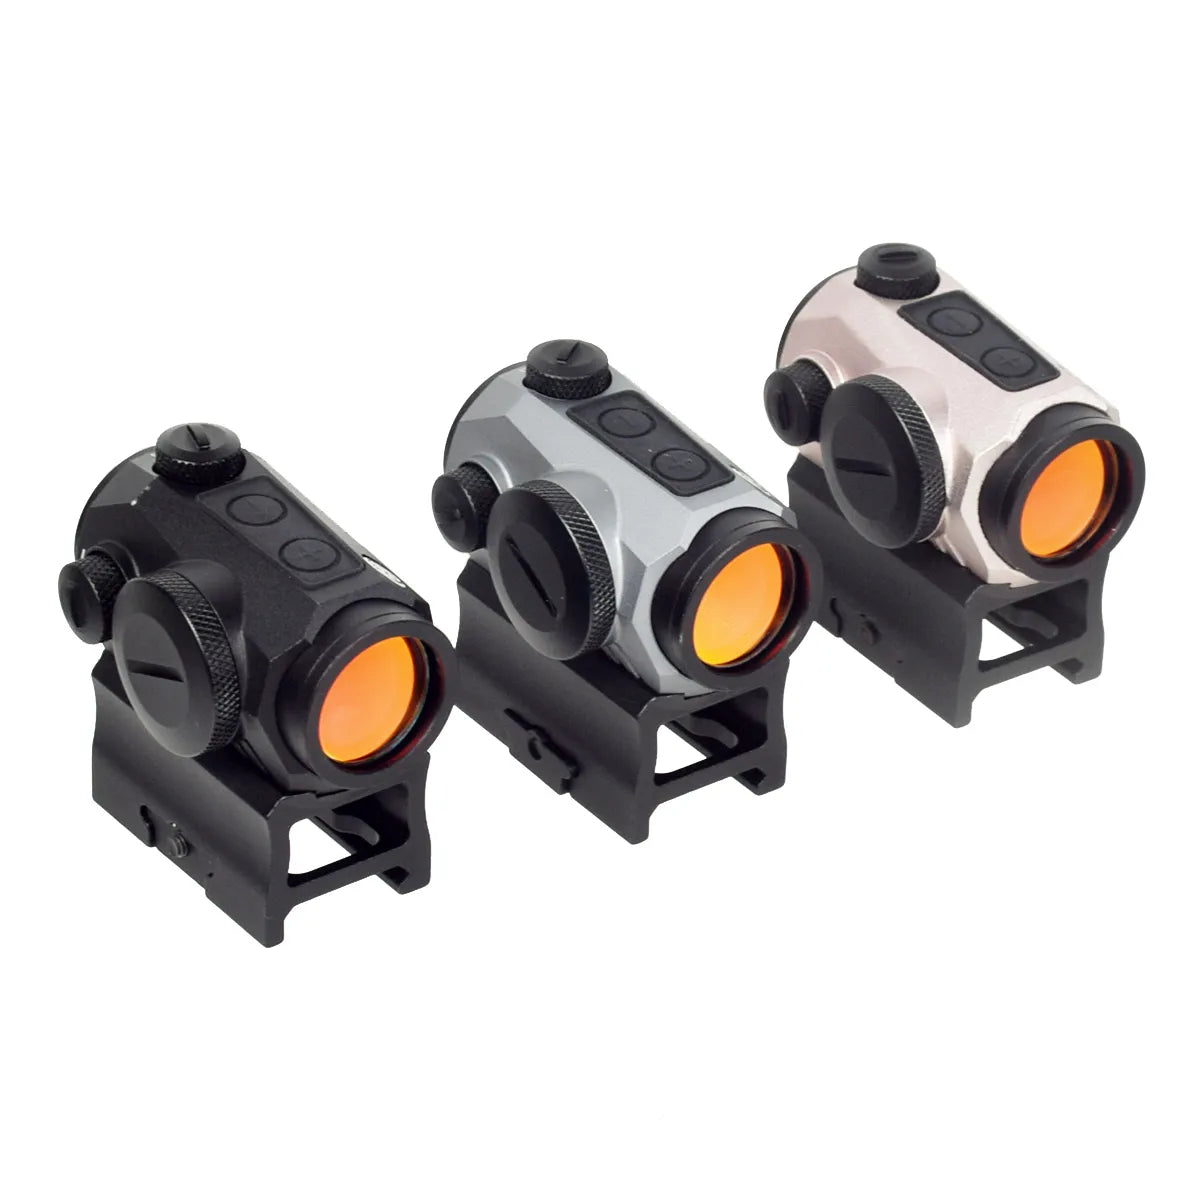 ROMEO5 1x20mm 2 MOA Red Dot Sight With Unity Fast Mount Riser 20mm Rail Co-Witness